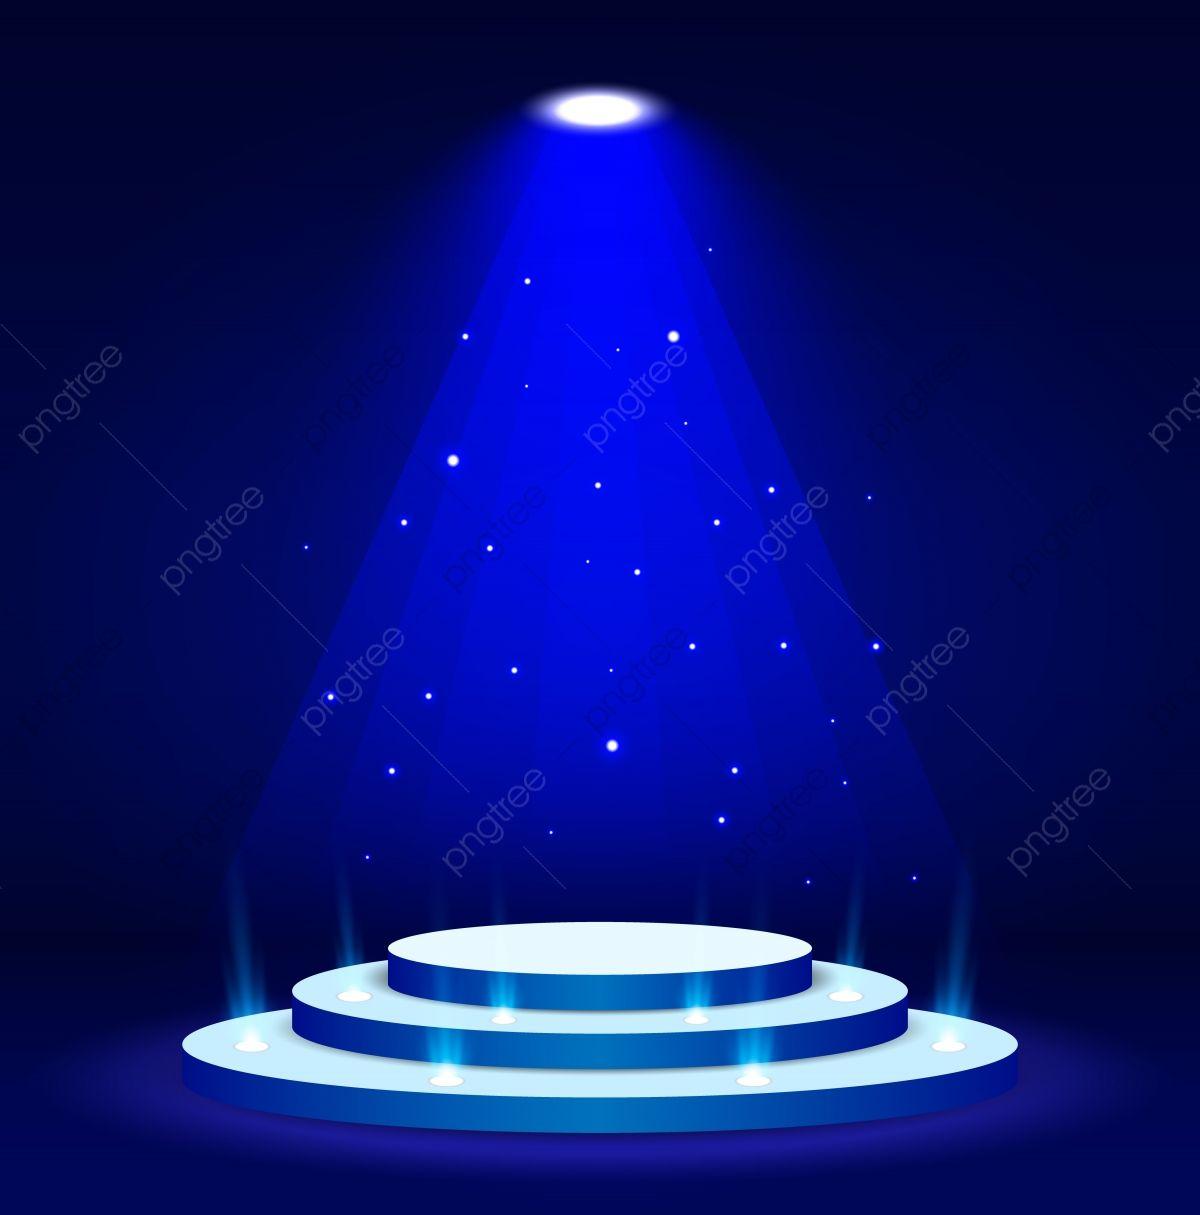 Podium Background Images HD Pictures and Wallpaper For Free Download   Pngtree